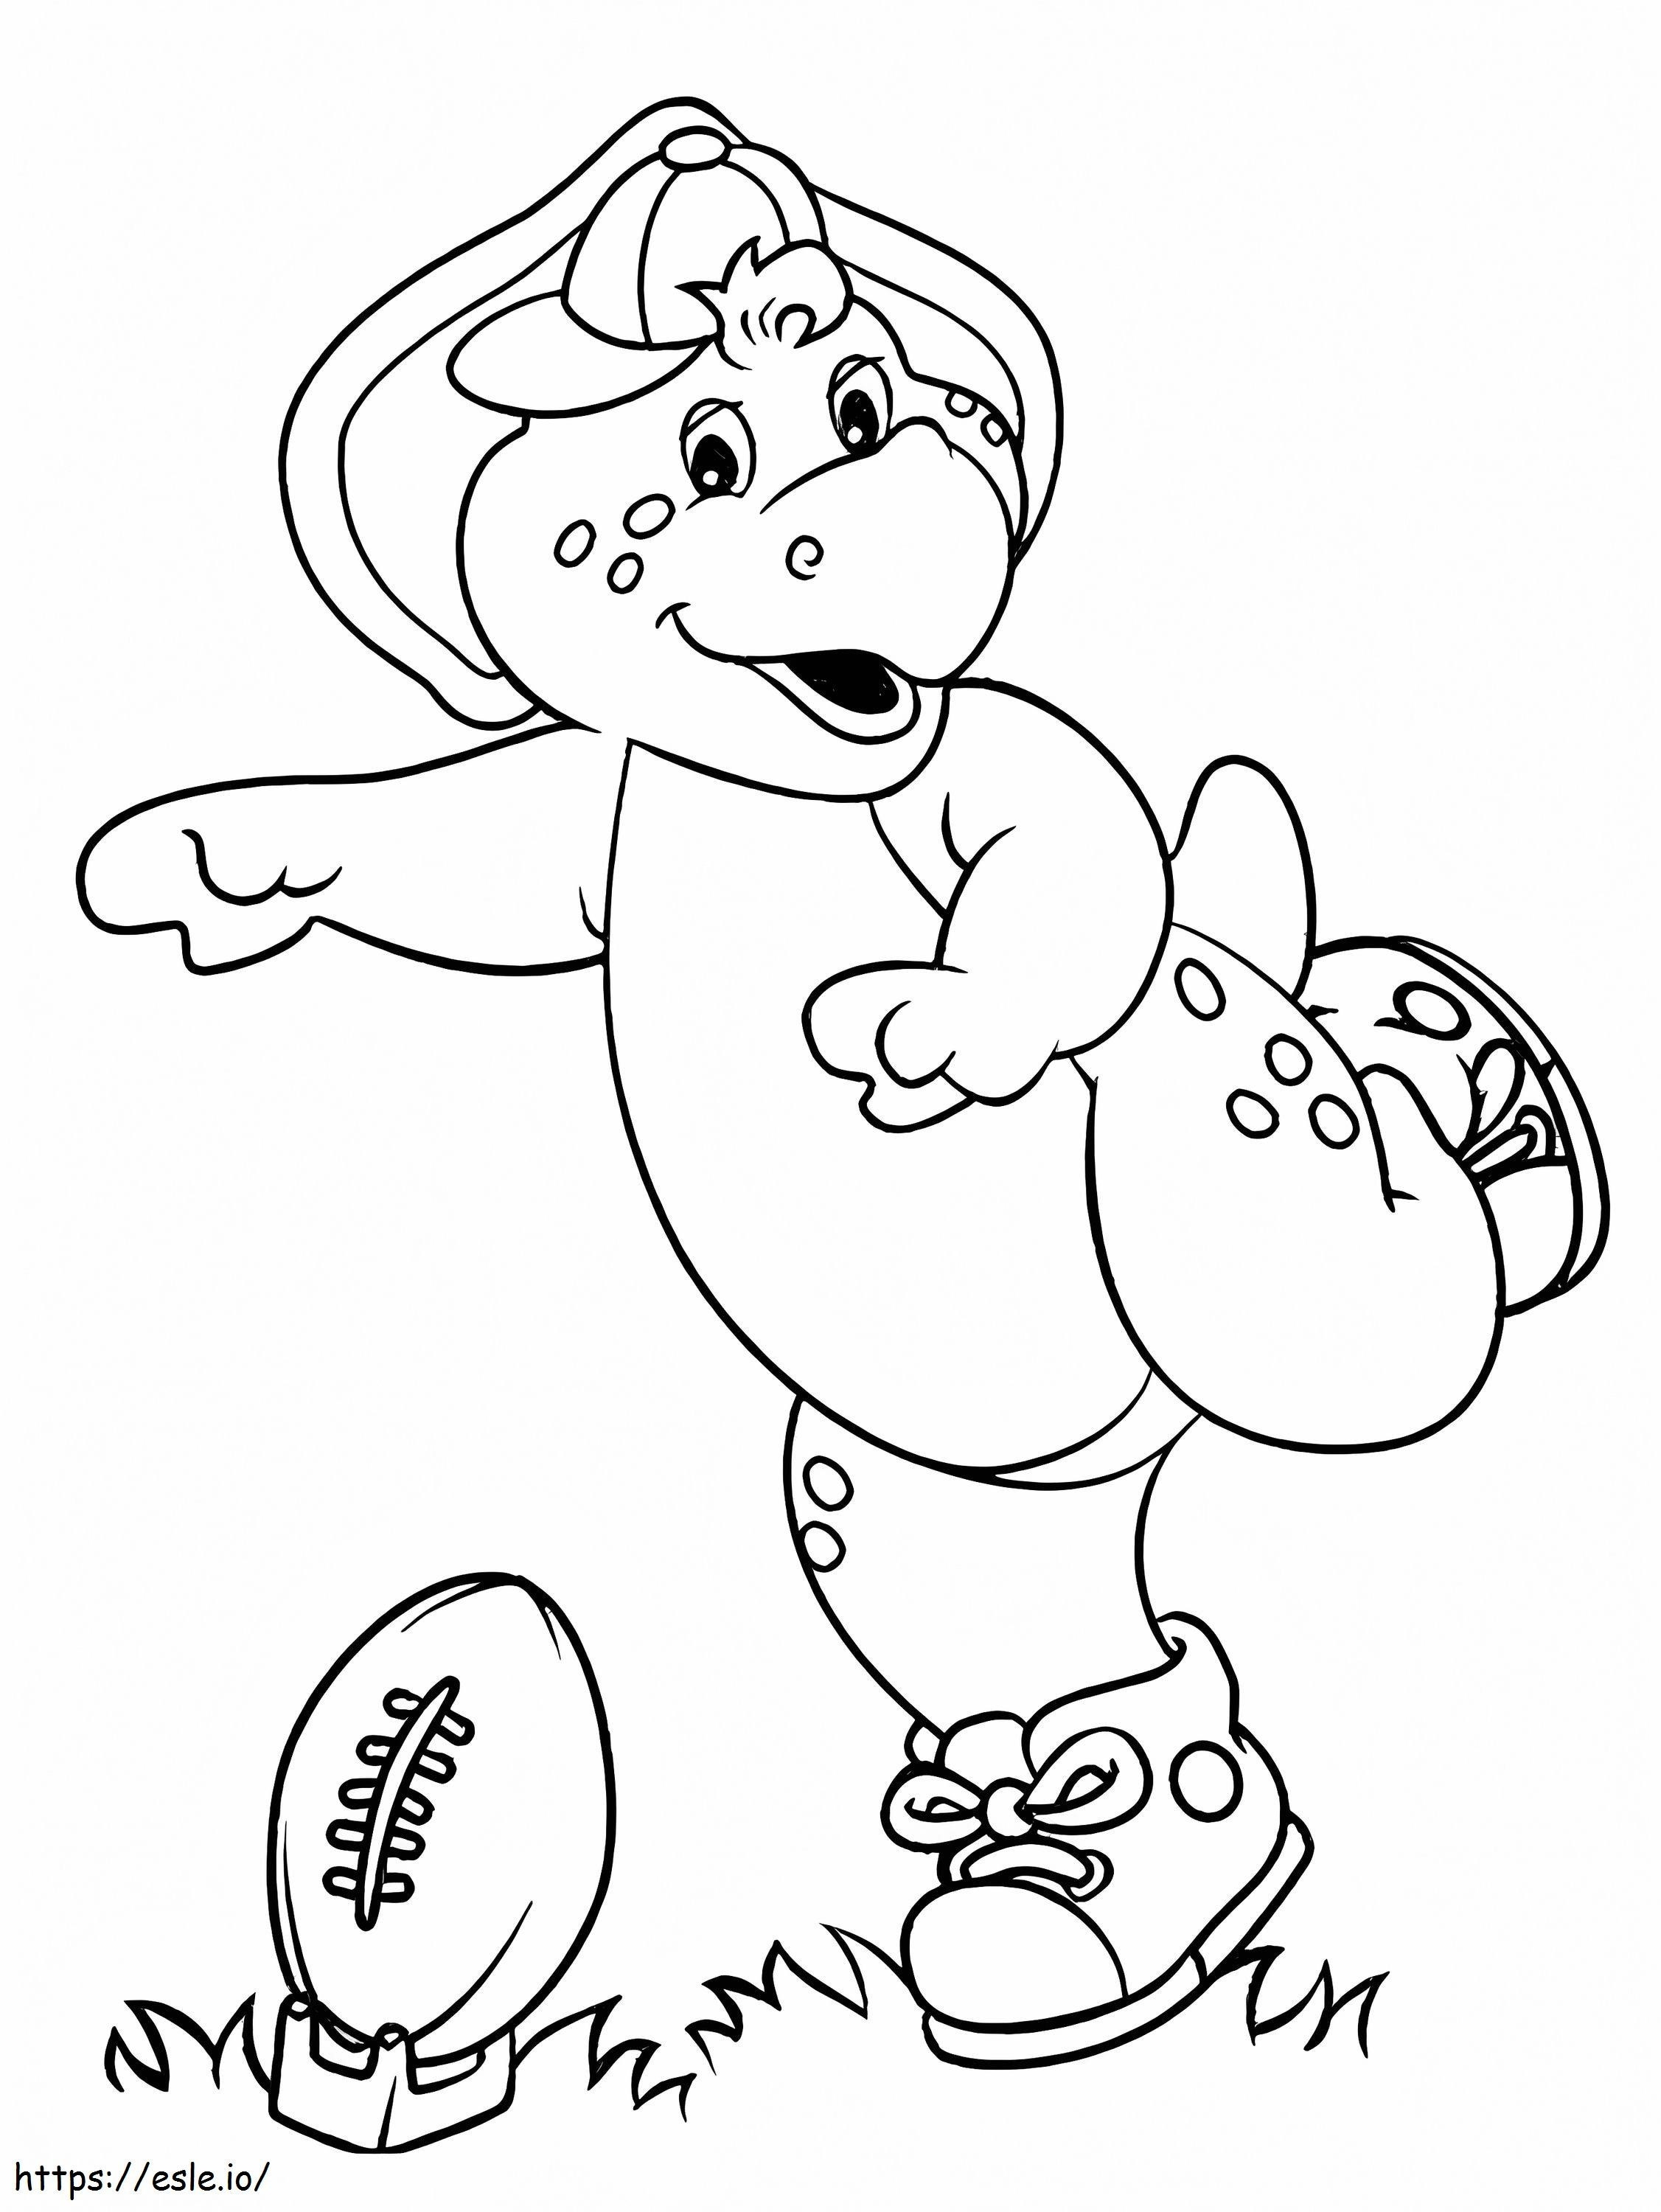 1583224264 The Current coloring page